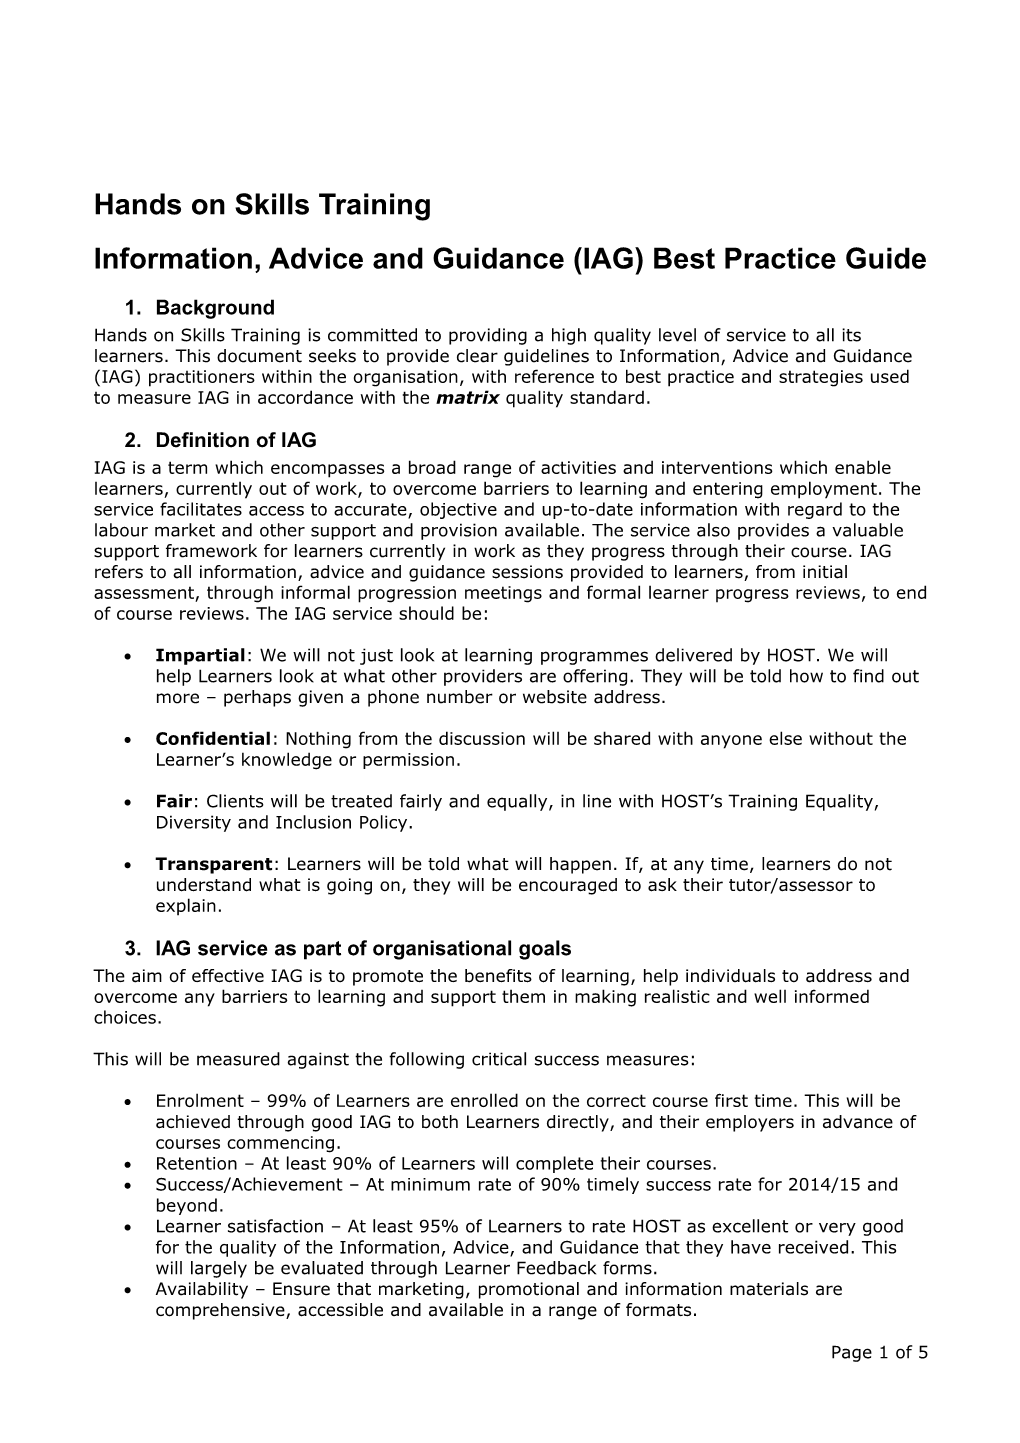 Information, Advice and Guidance (IAG) Best Practice Guide